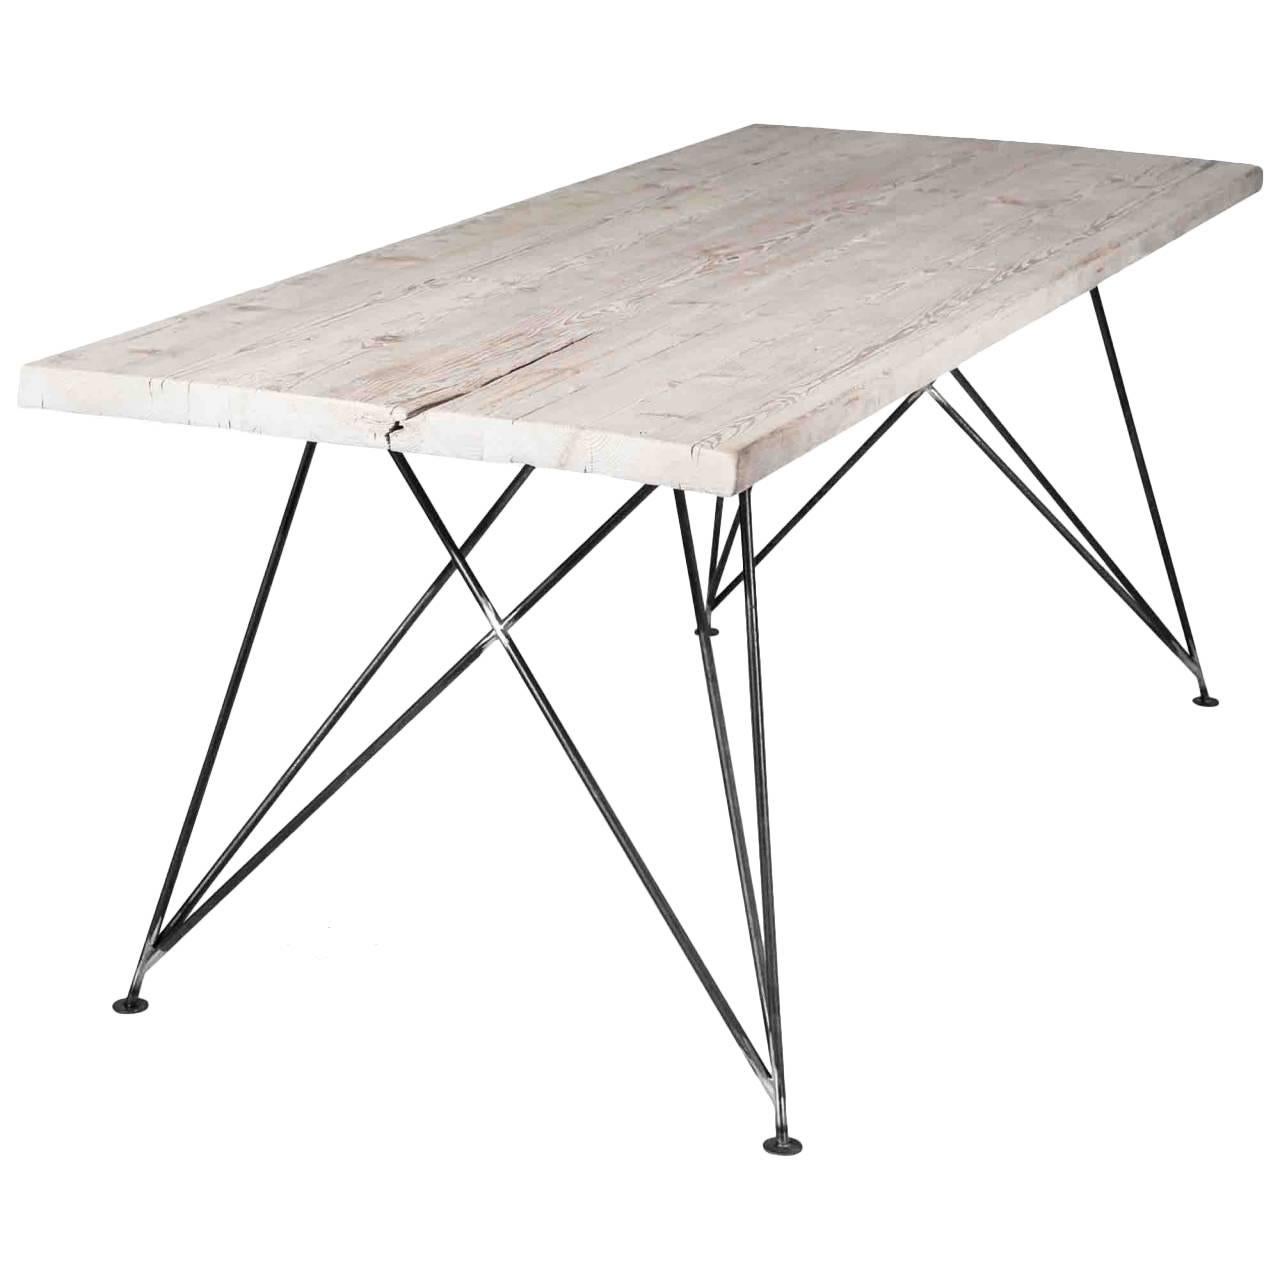 Dining Room Table "Mc 01" by Manufacturer Wuud in Spruce Wood and Steel (250 cm) For Sale